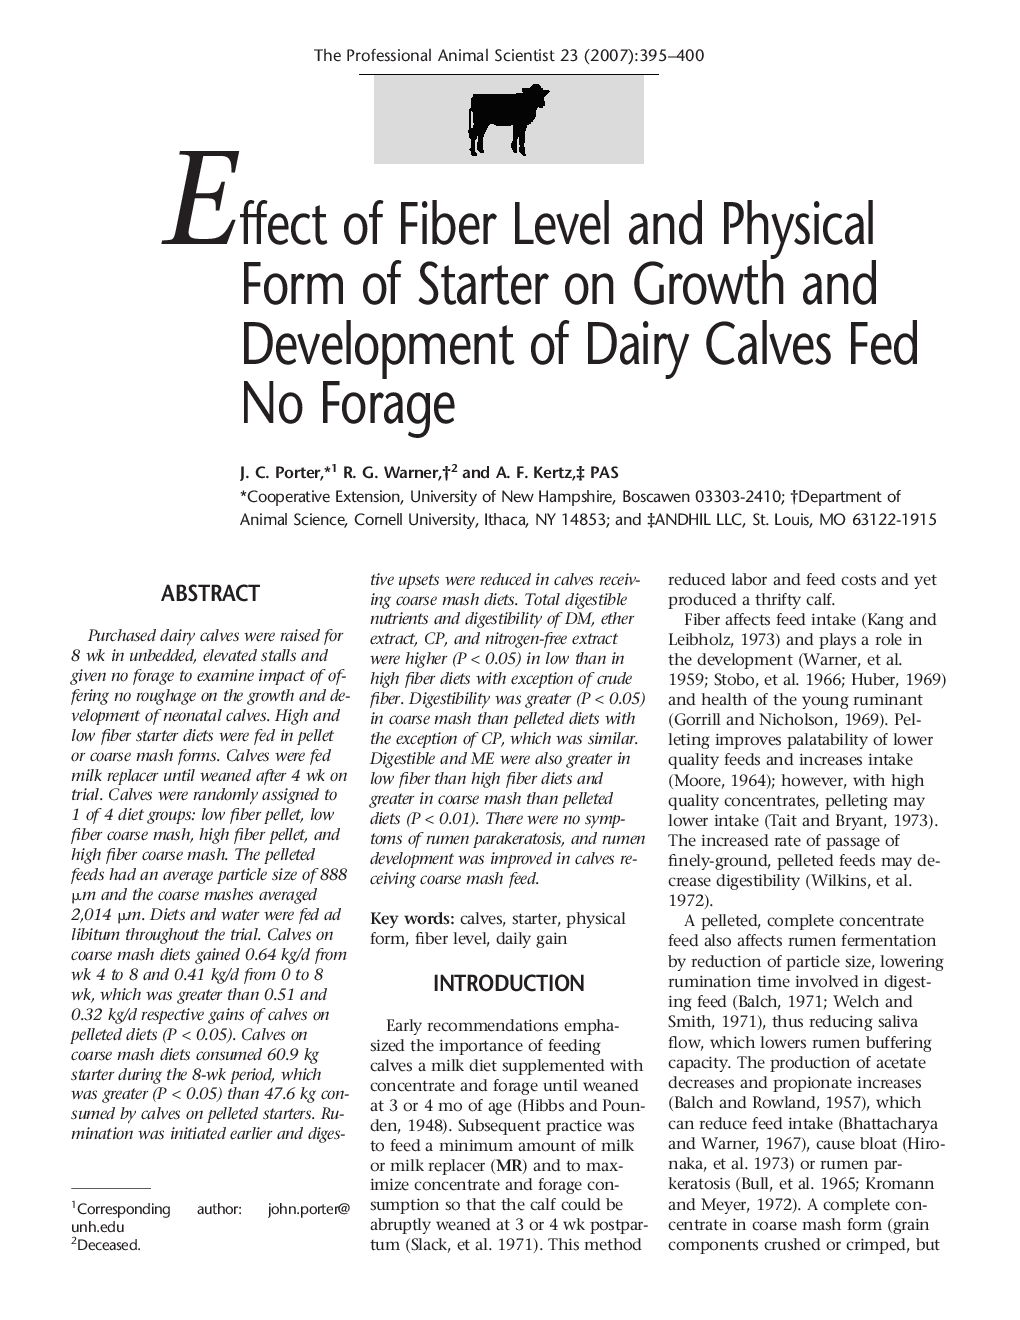 Effect of Fiber Level and Physical Form of Starter on Growth and Development of Dairy Calves Fed No Forage